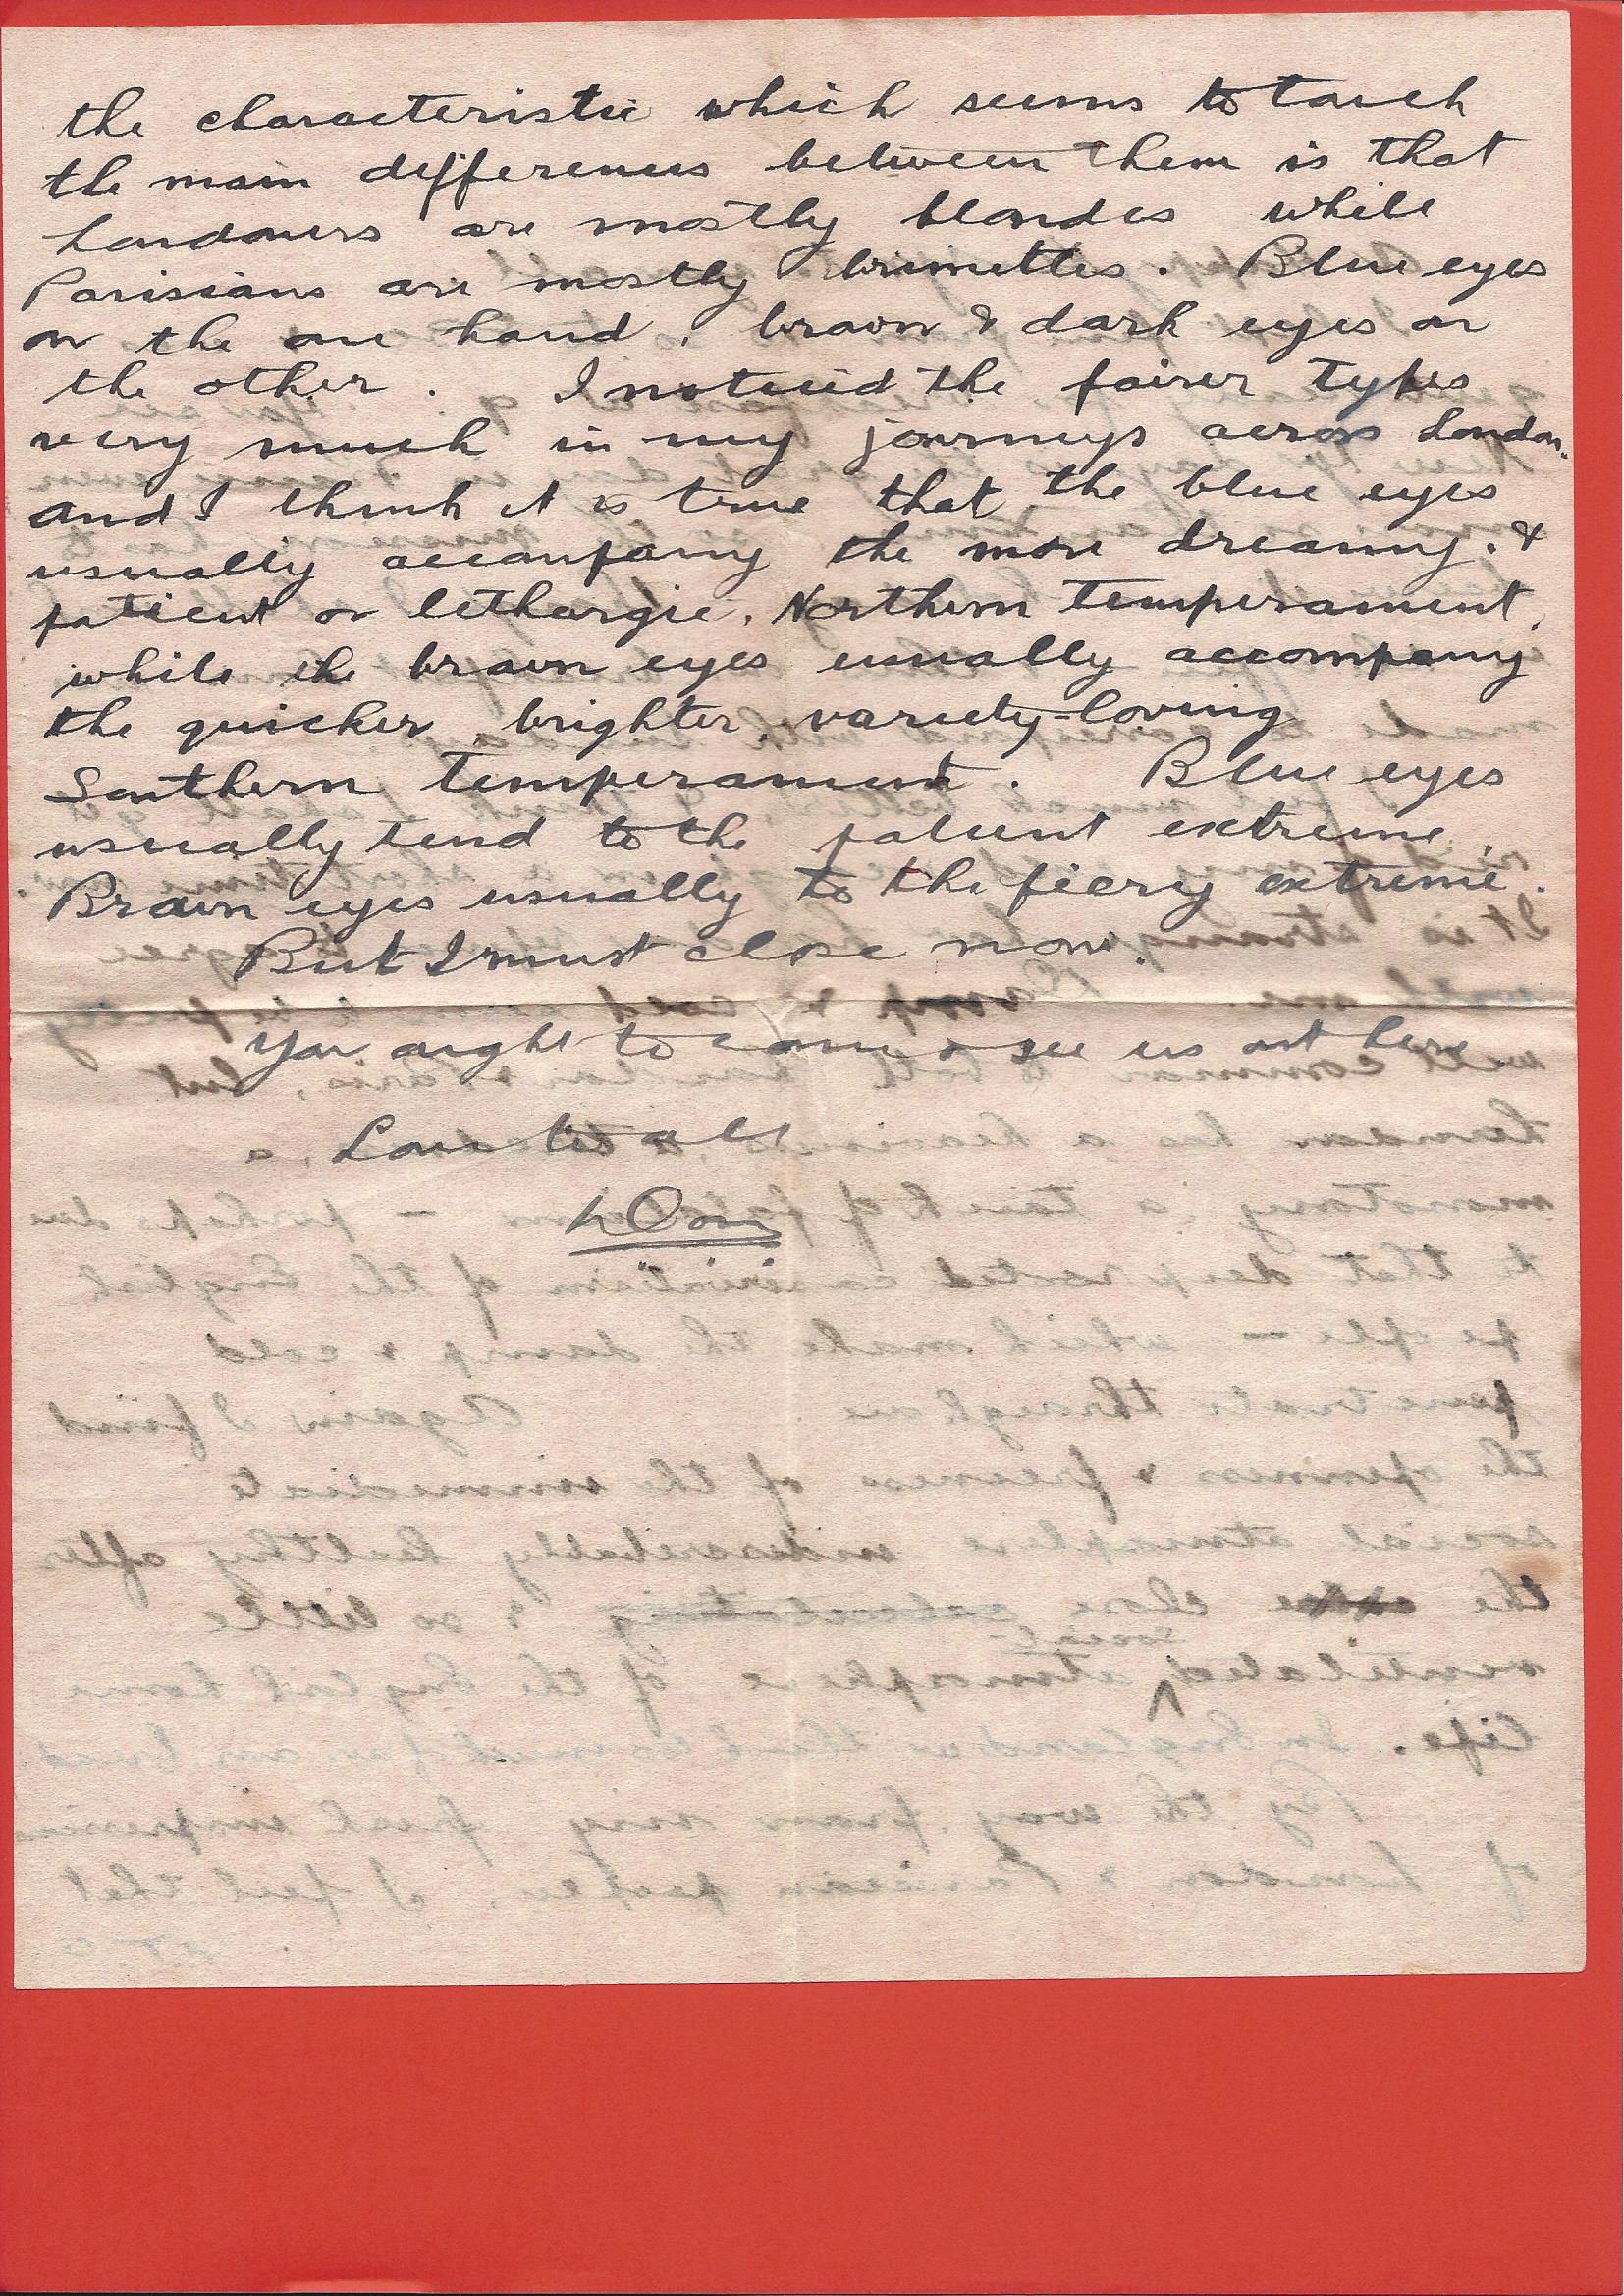 1919-12-31 page 4 letter by Donald Bearman